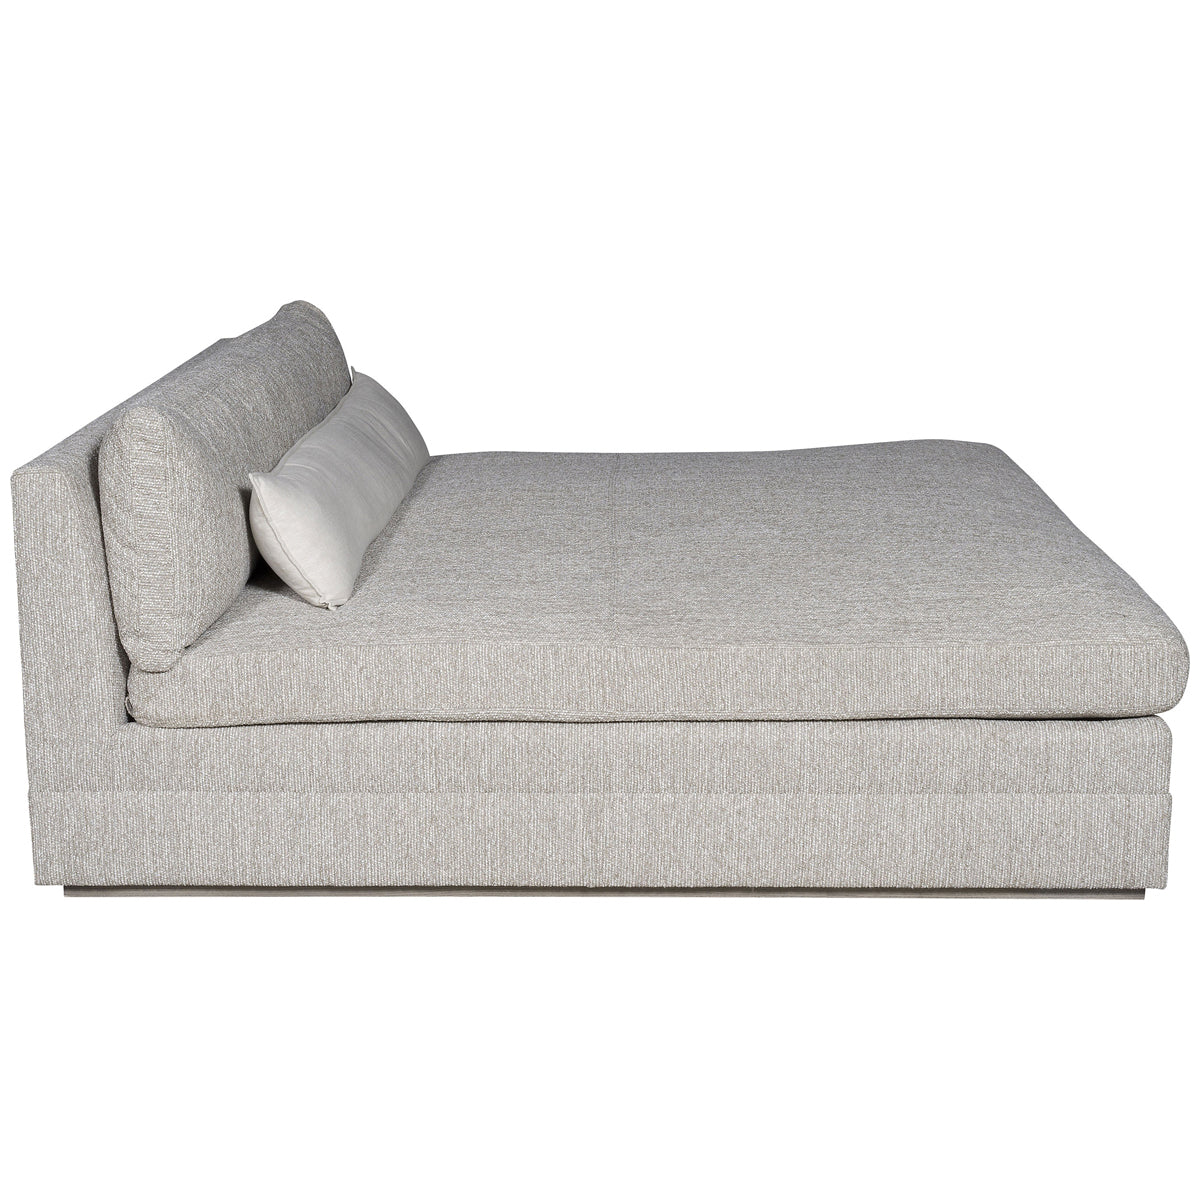 Vanguard Furniture Boyden Double Chaise Lounge